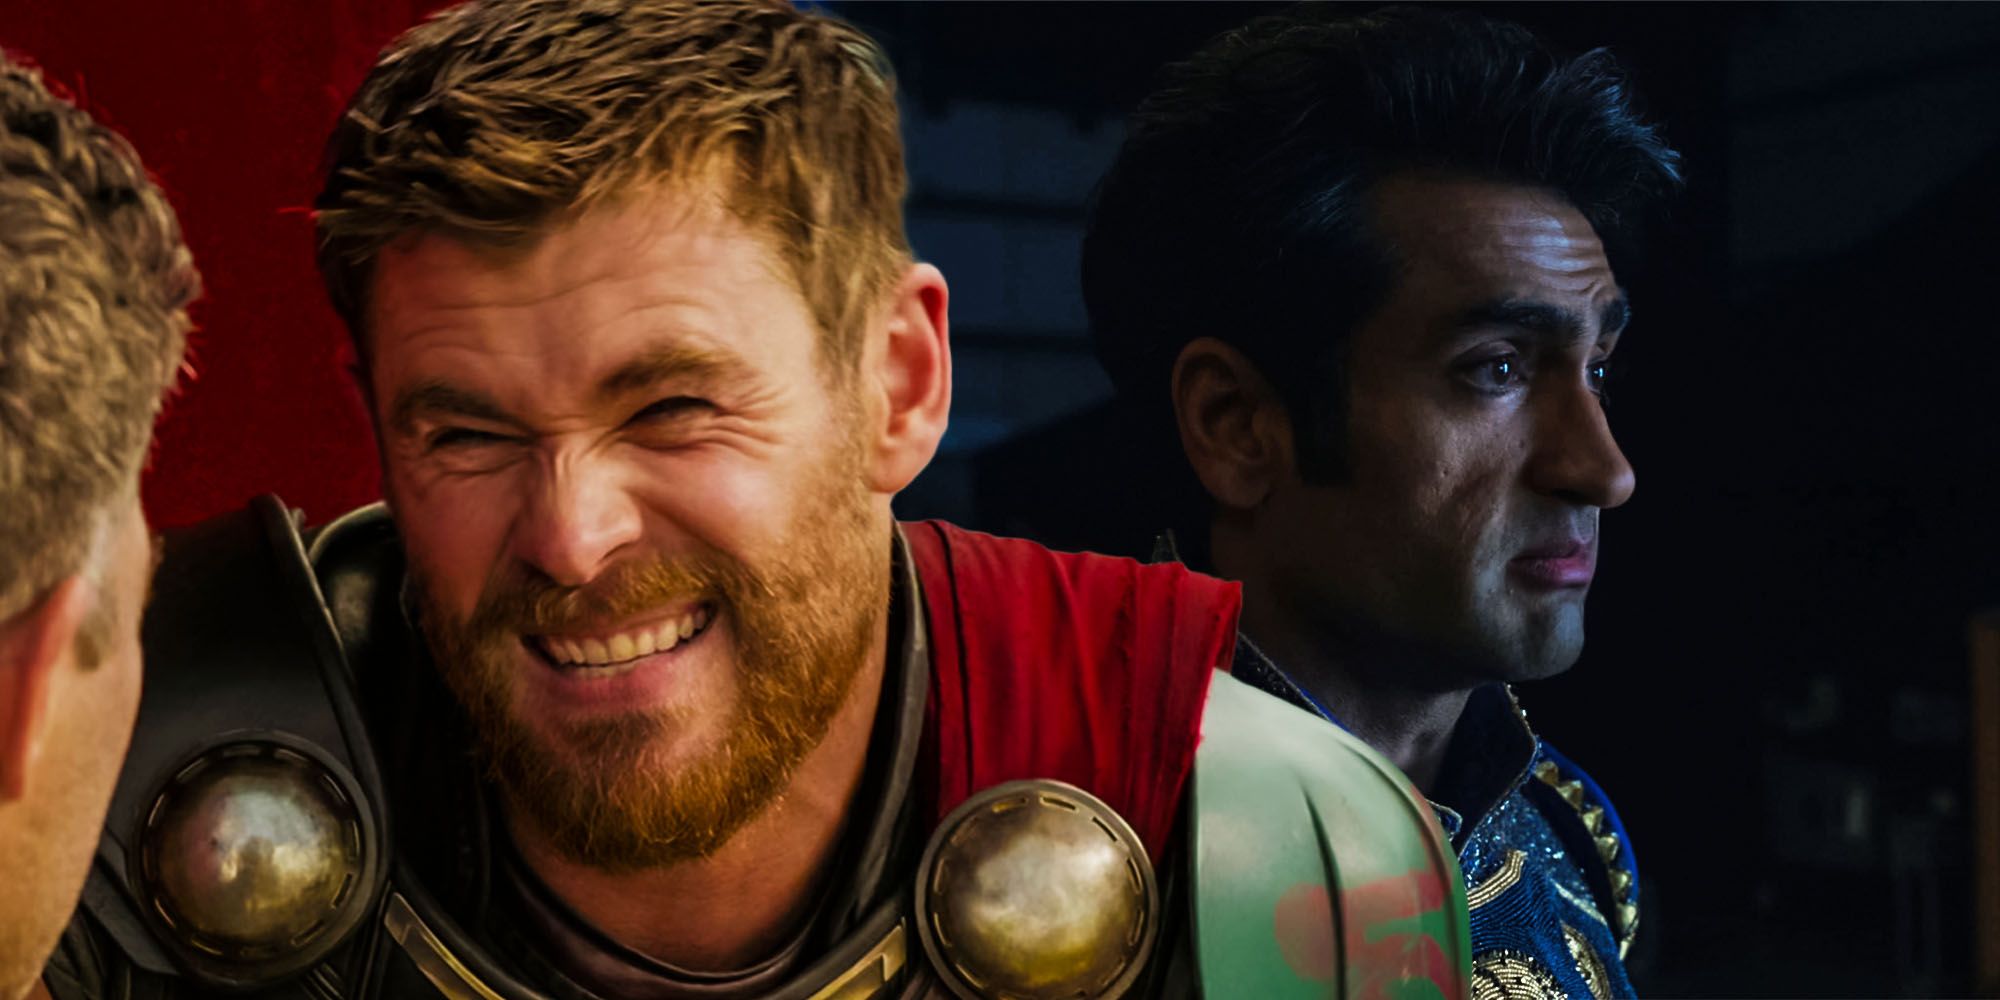 Eternals Explains Why Thor Wasn't The Avengers' Leader